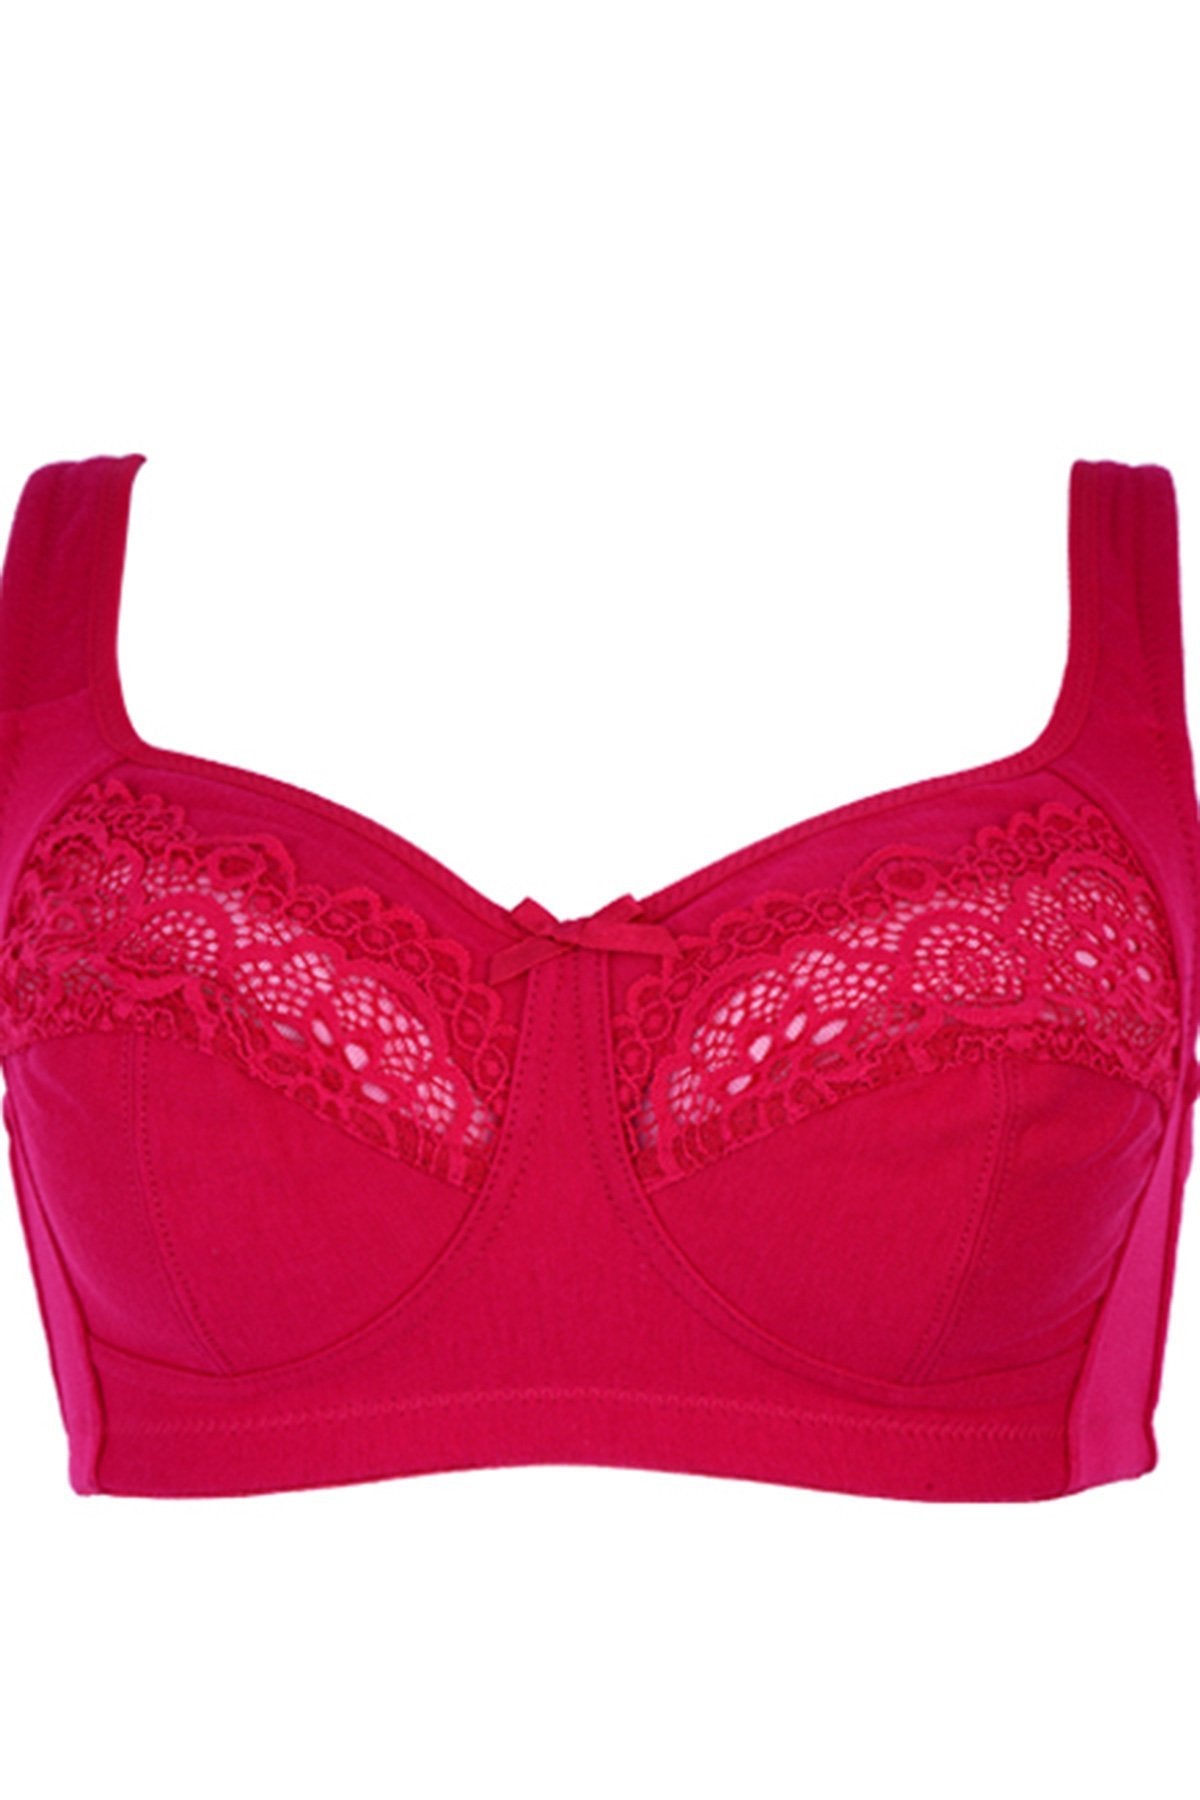 BLS - Cece Non Wired And Non Padded Cotton Bra - Burgundy